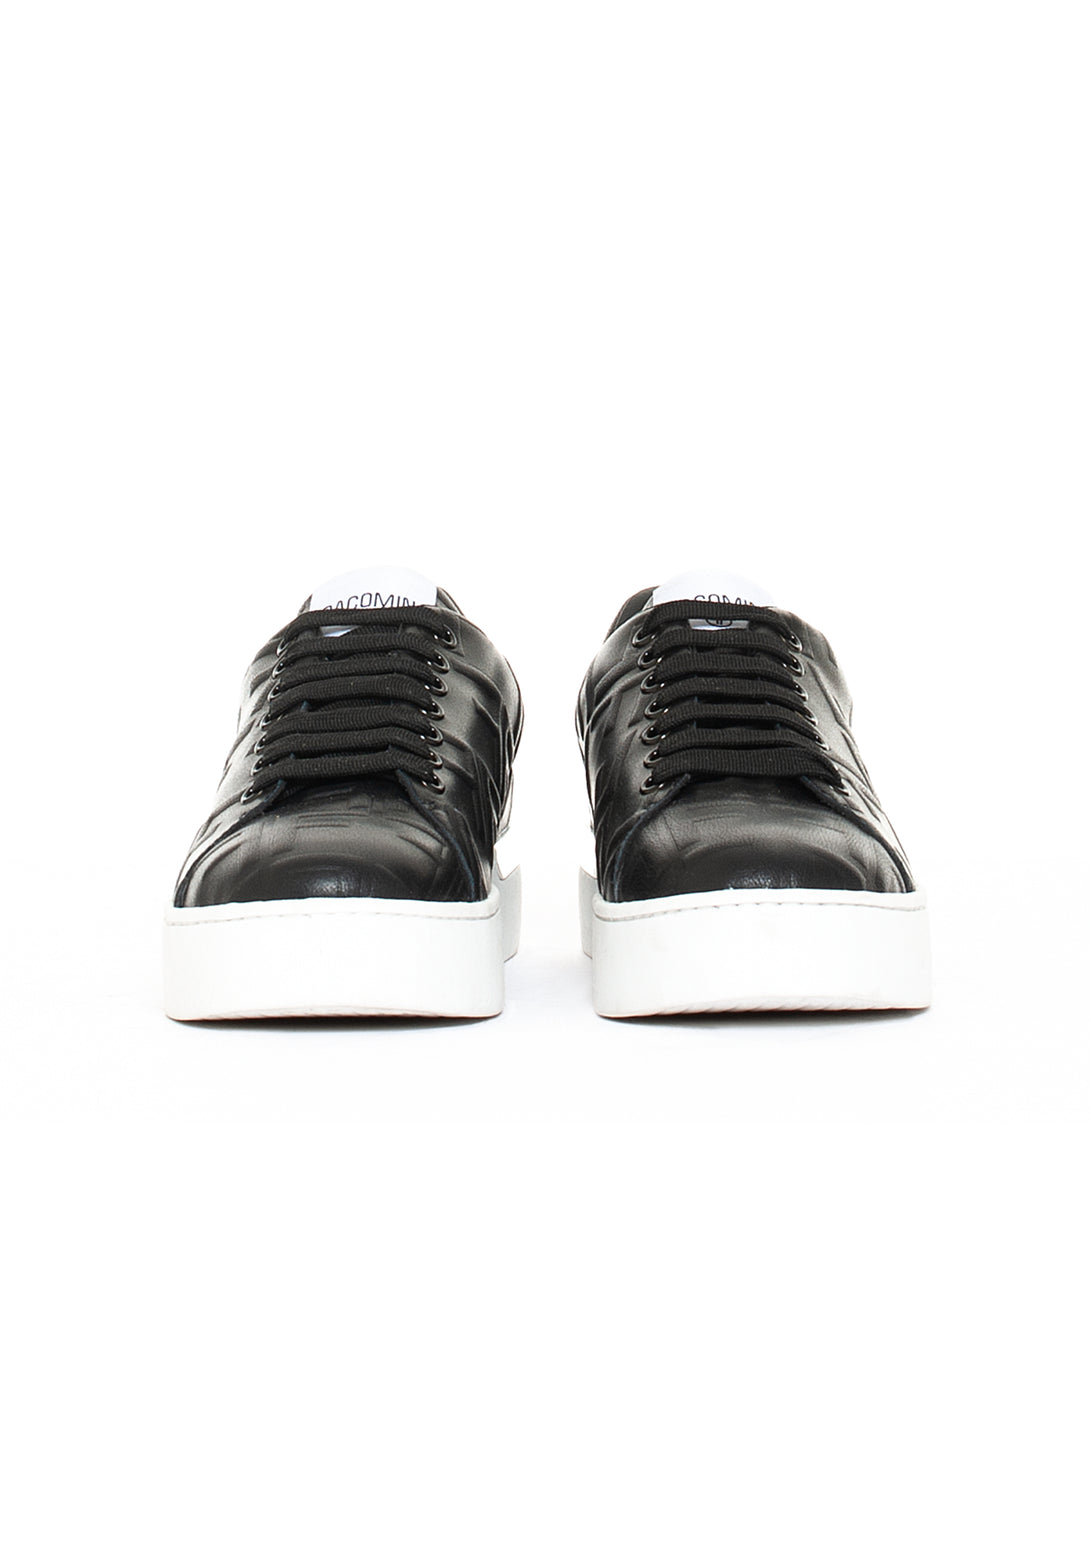 Sneakers made in fake leather with front lacing